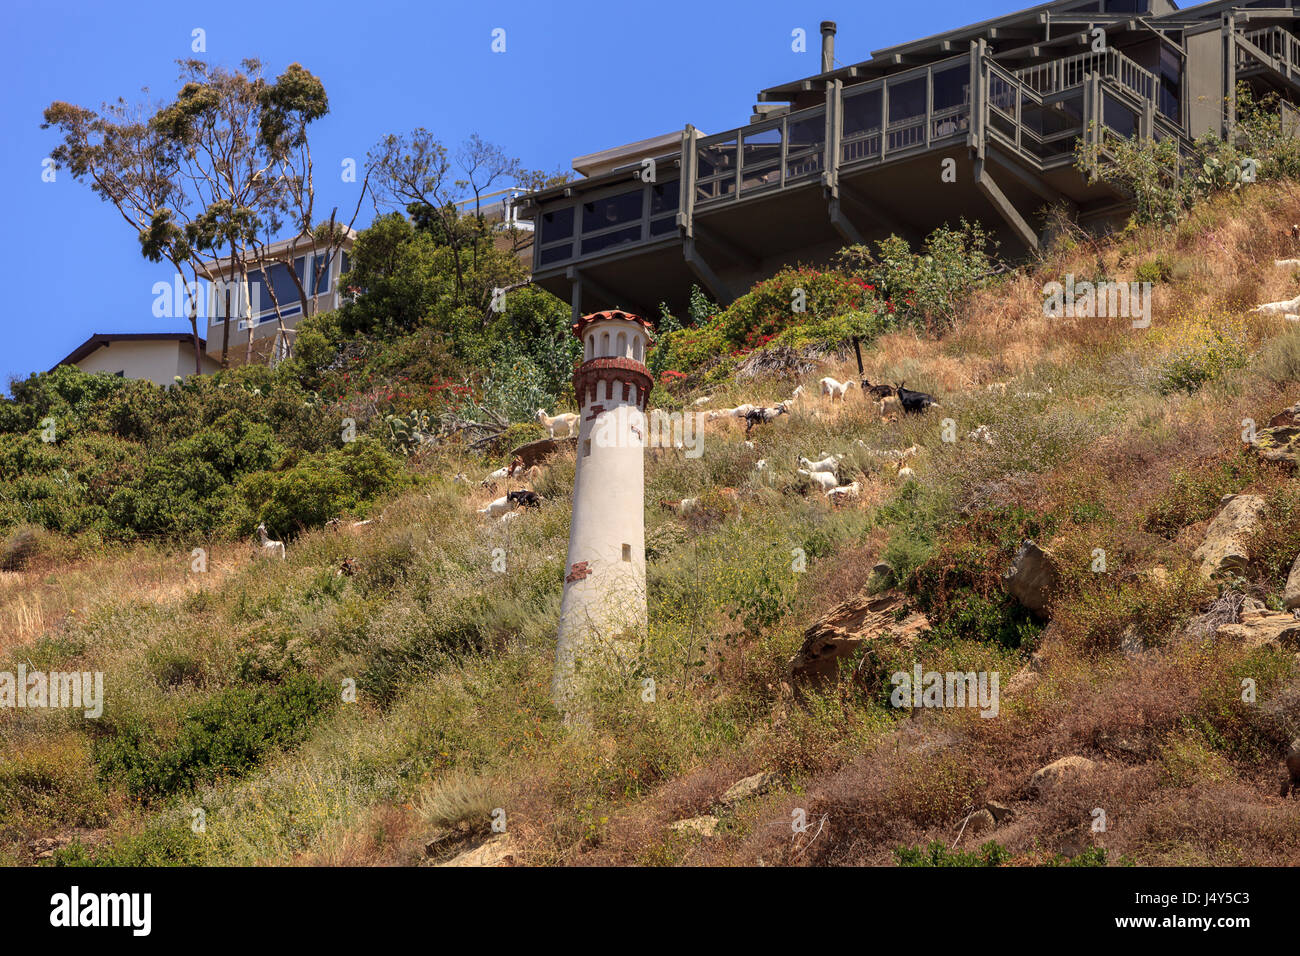 Goats cluster along a hillside with homes and a tower in Laguna Beach as a means of land maintenance and eating away wild brush that could lead to wil Stock Photo